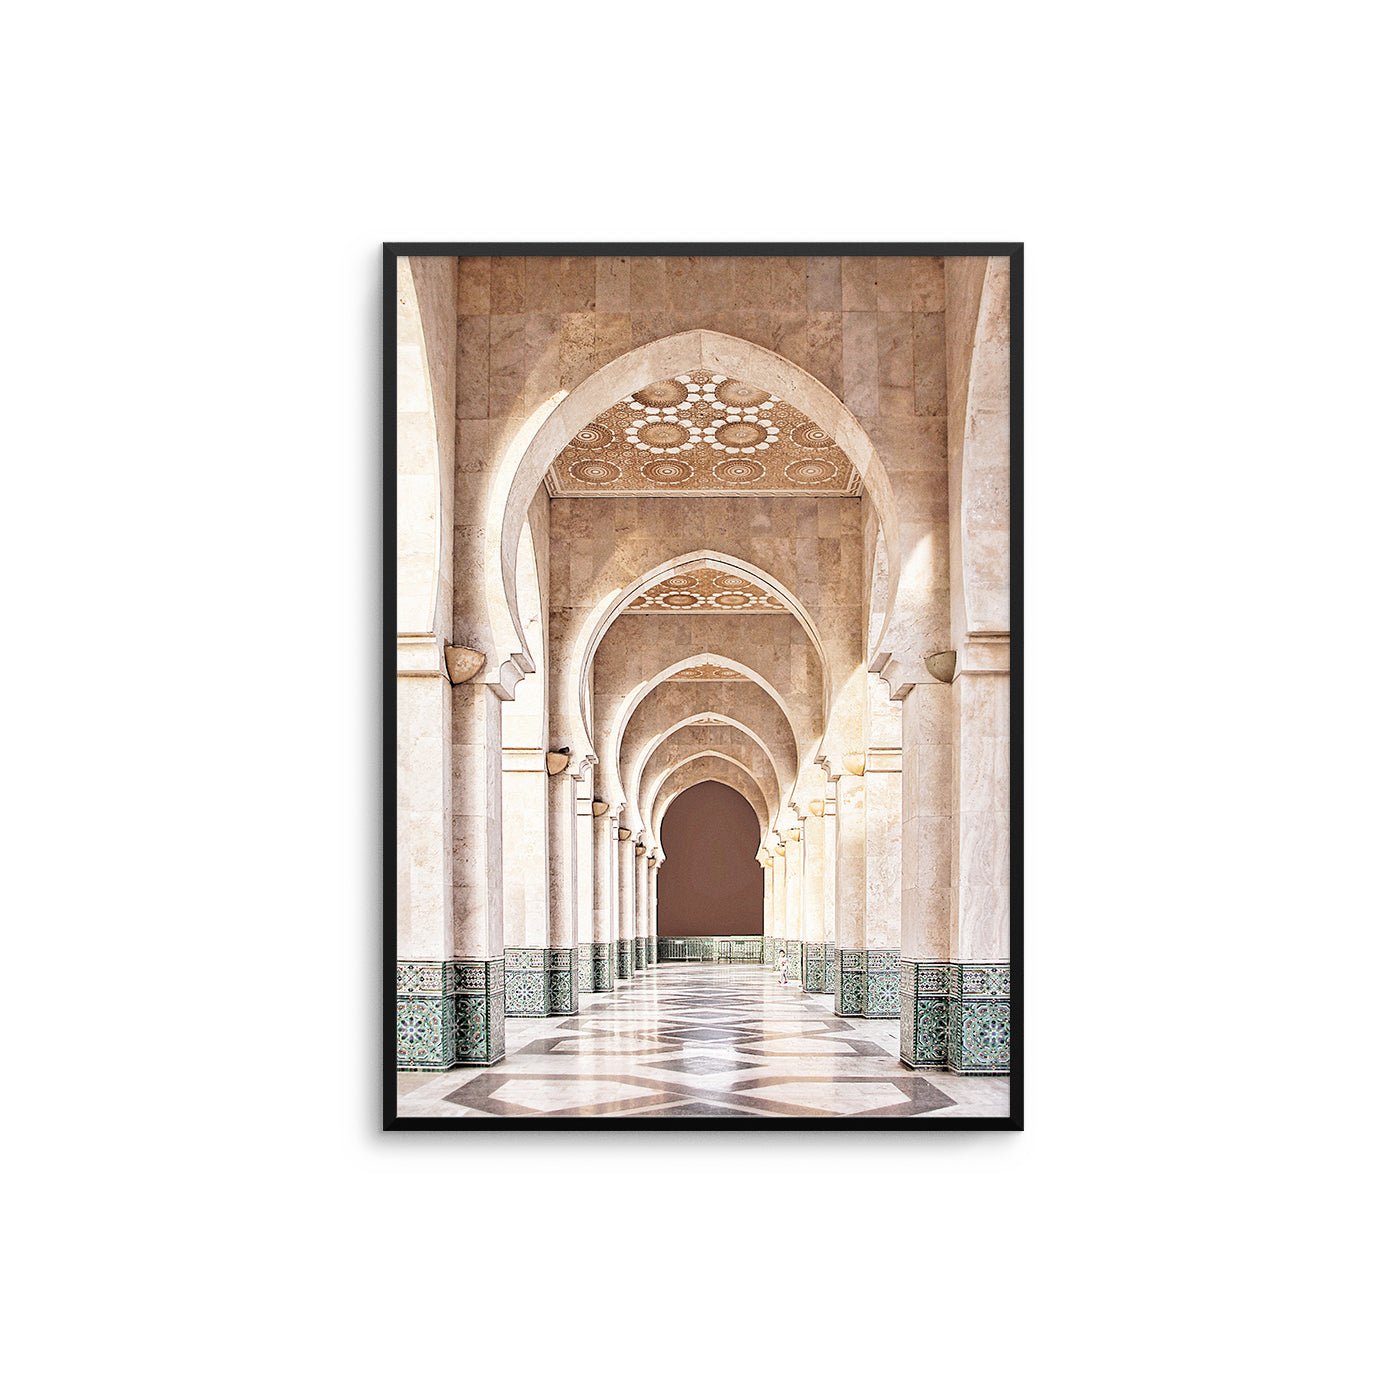 Moroccan Arches - D'Luxe Prints